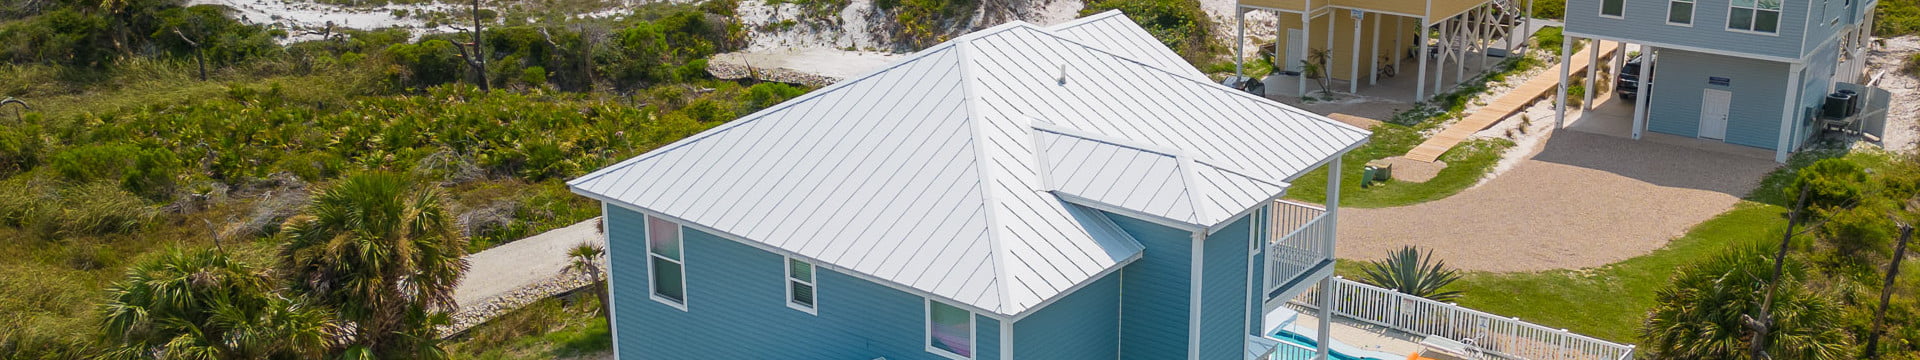 Hall Roofing Company Florida's Forgotten Coast Roofing Experts